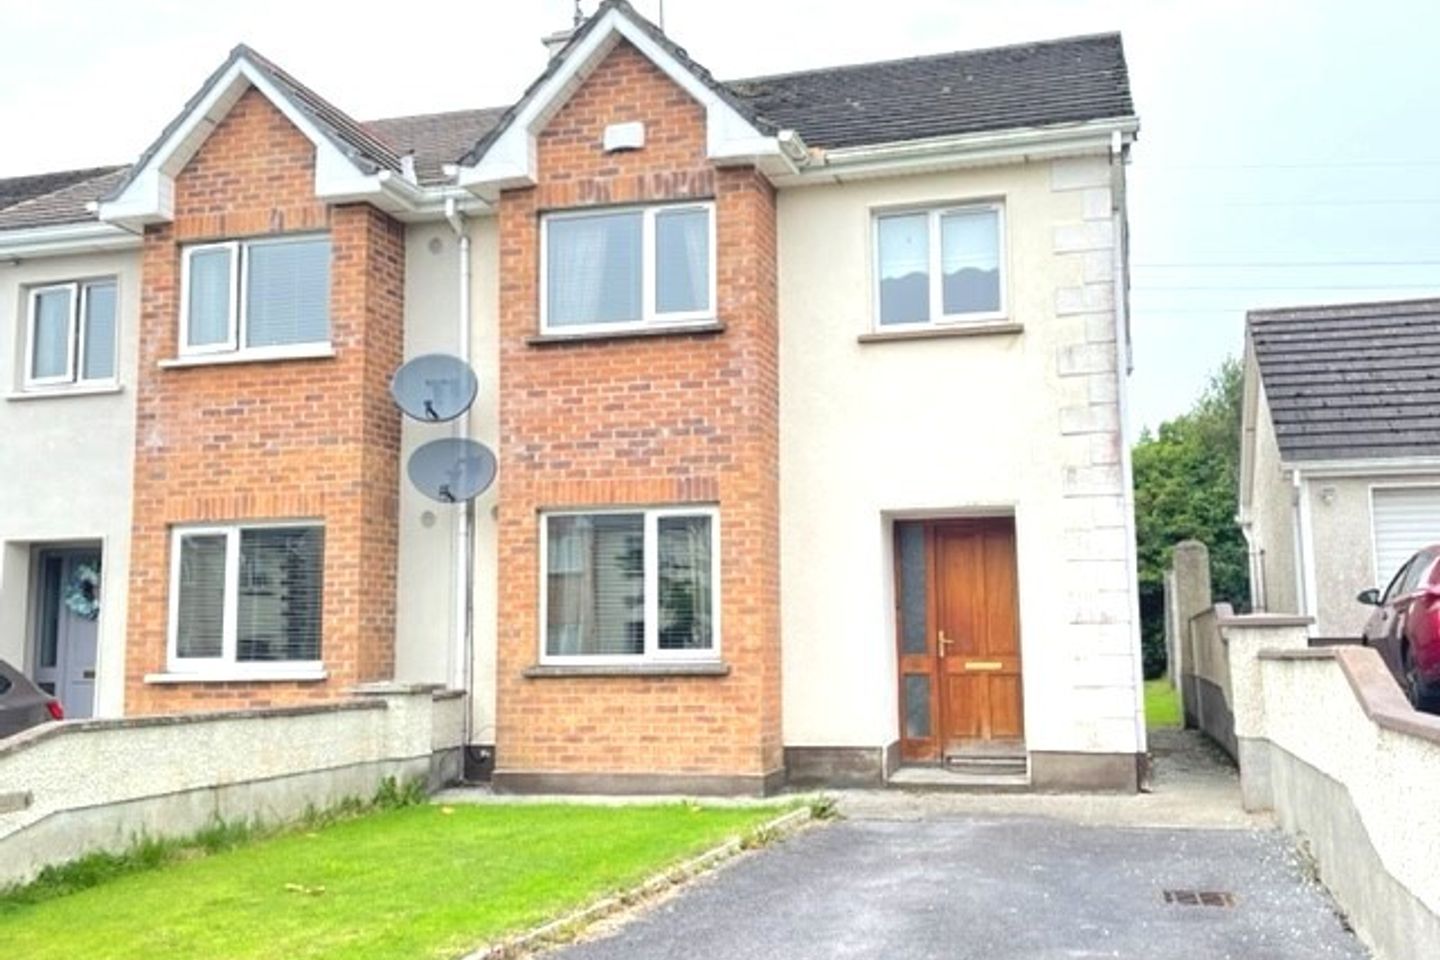 24 Cluainbroc, Old Galway Road, Athlone, Co. Roscommon